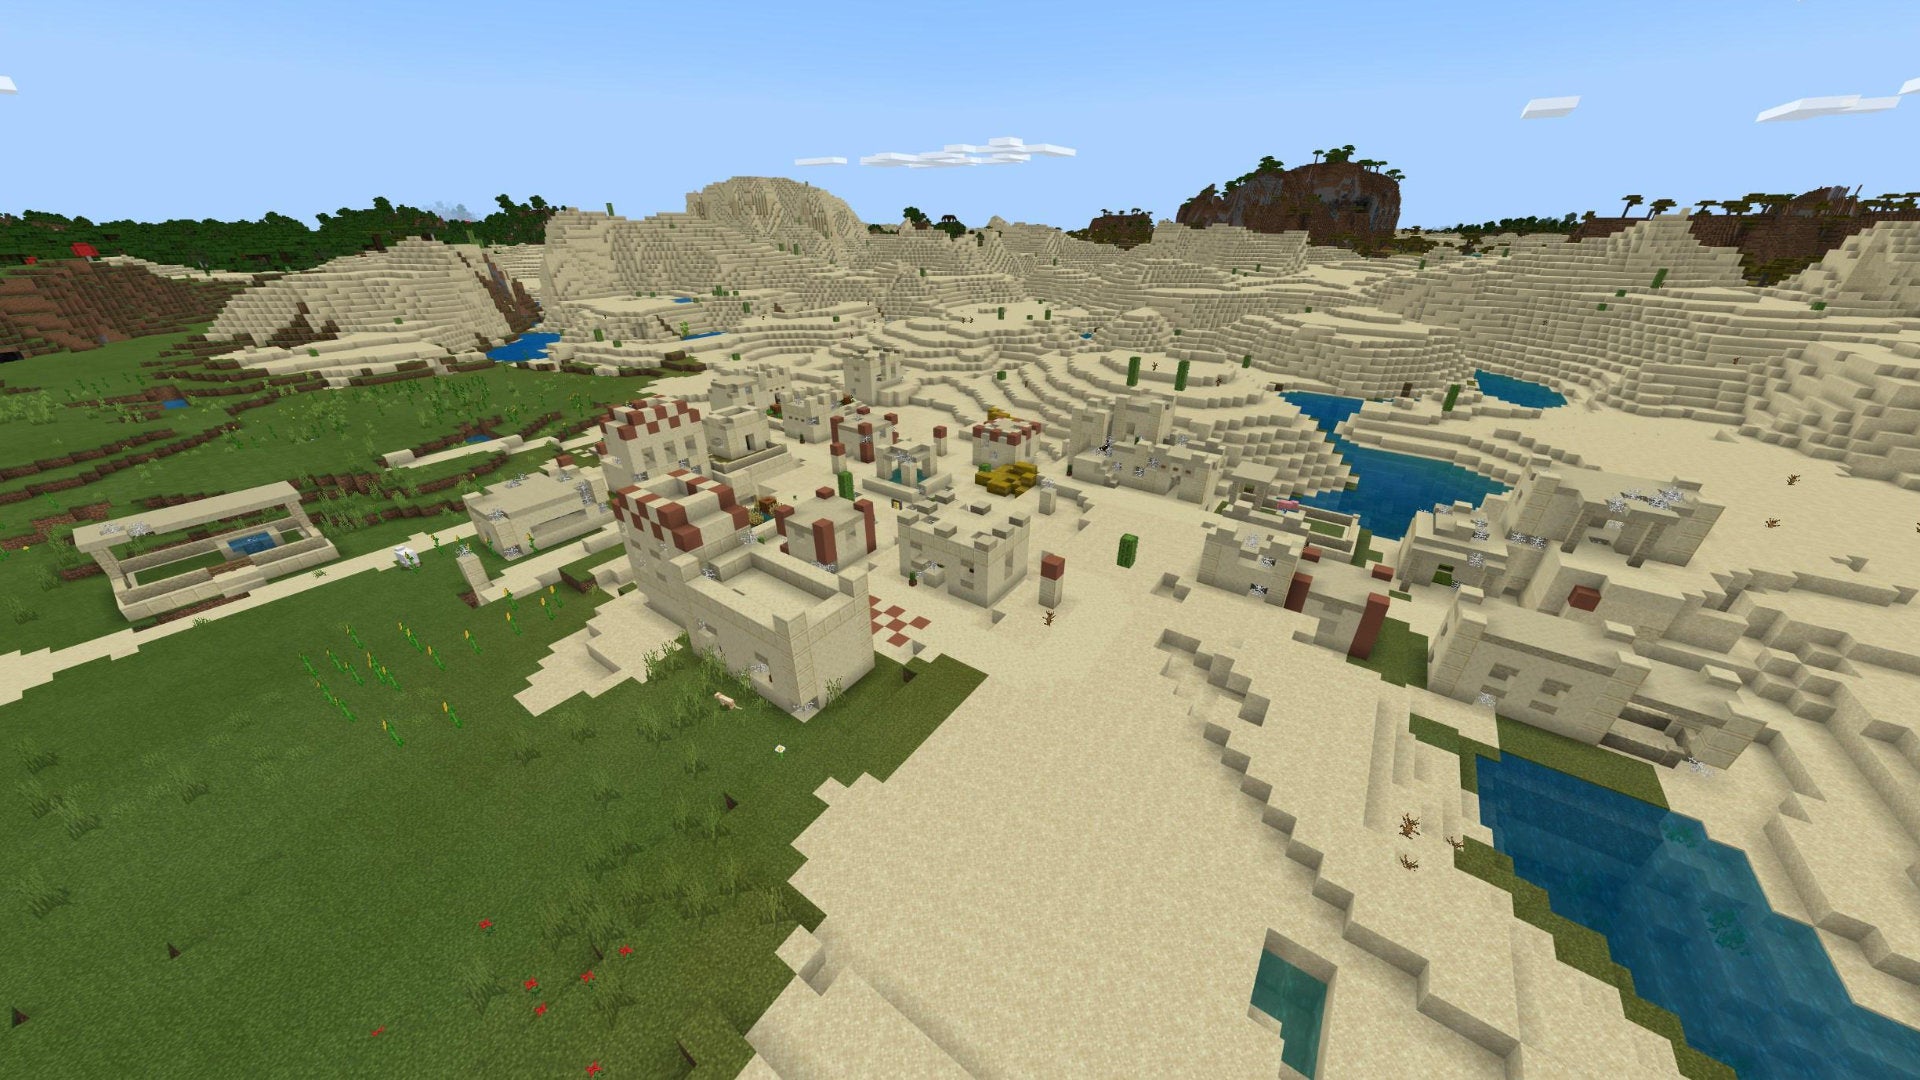 A Minecraft Bedrock screenshot of a new world created with the seed -2125155448.